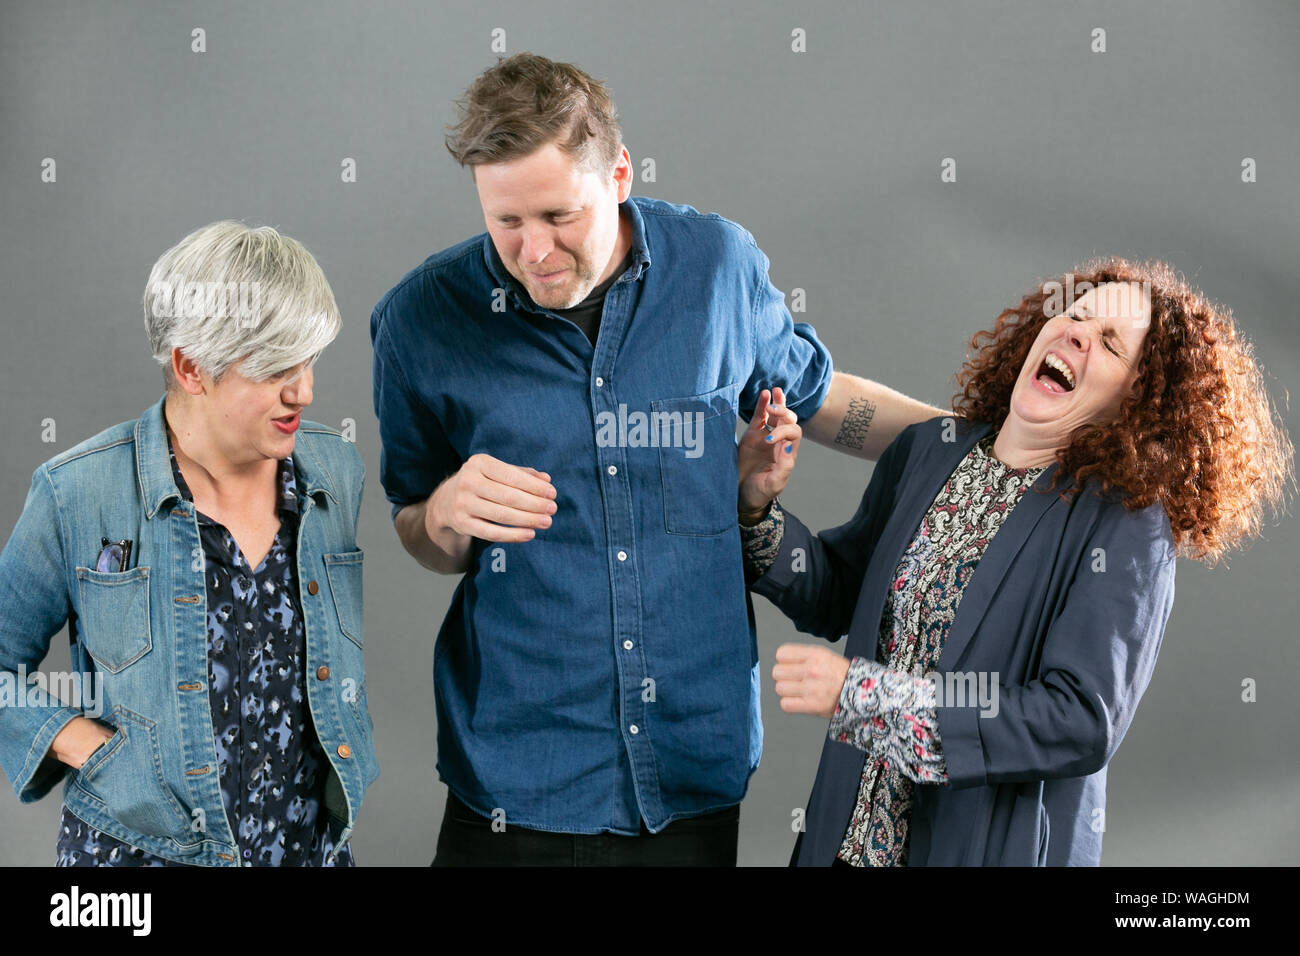 Edinburgh, Scotland, UK, 20 Aug 2019. Pictured at the Edinburgh Book Festival, L to R, Tracey Thorn, singer, songwriter and author, Max Porter, 2019 Booker long listed author, Maggie O'Farrell, Irish-British Novelist. Credit: Brian Wilson/Alamy Live News Stock Photo